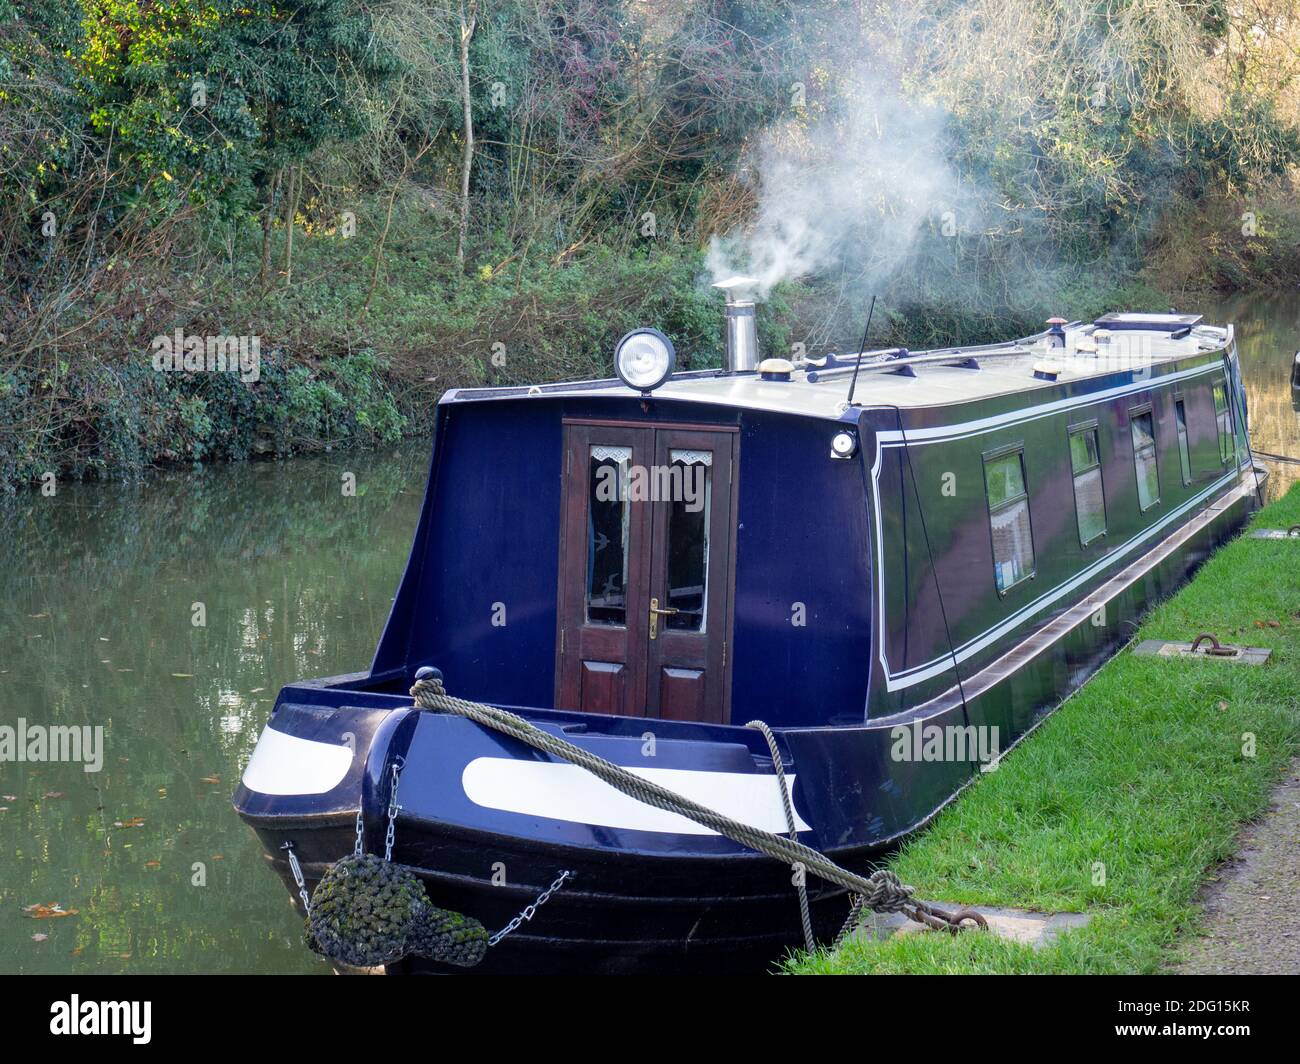 Winter scene on the Grand Union canal at Stoke Bruerne, Northamptonshire, UK; moored narrowboat with smoke coming from the chimney Stock Photo